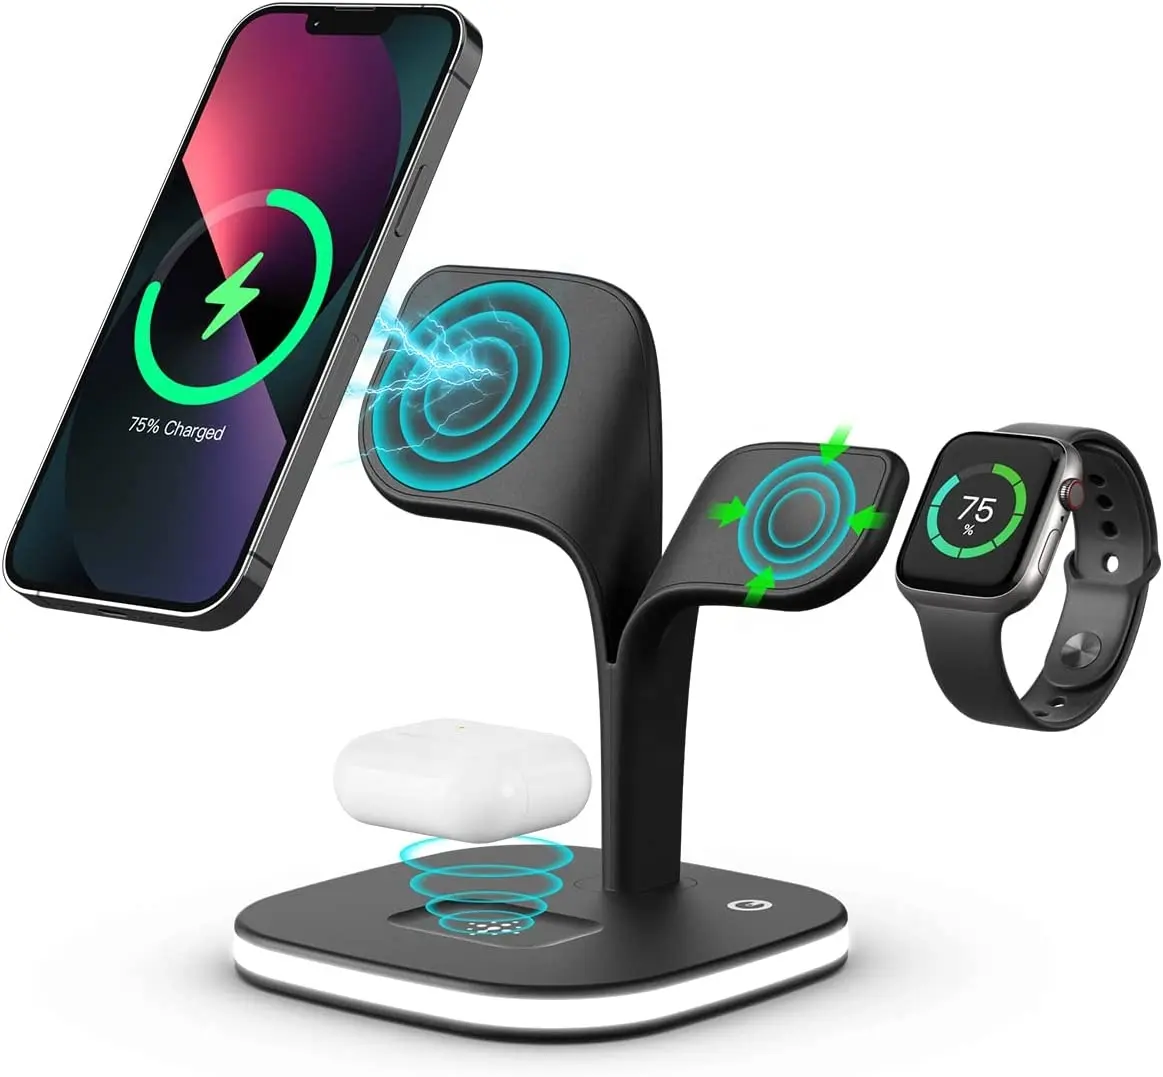 Led Lamp Fast 3 in 1 Magnetic Wireless Charger Alibaba Most Sold Product Amazon Best Seller